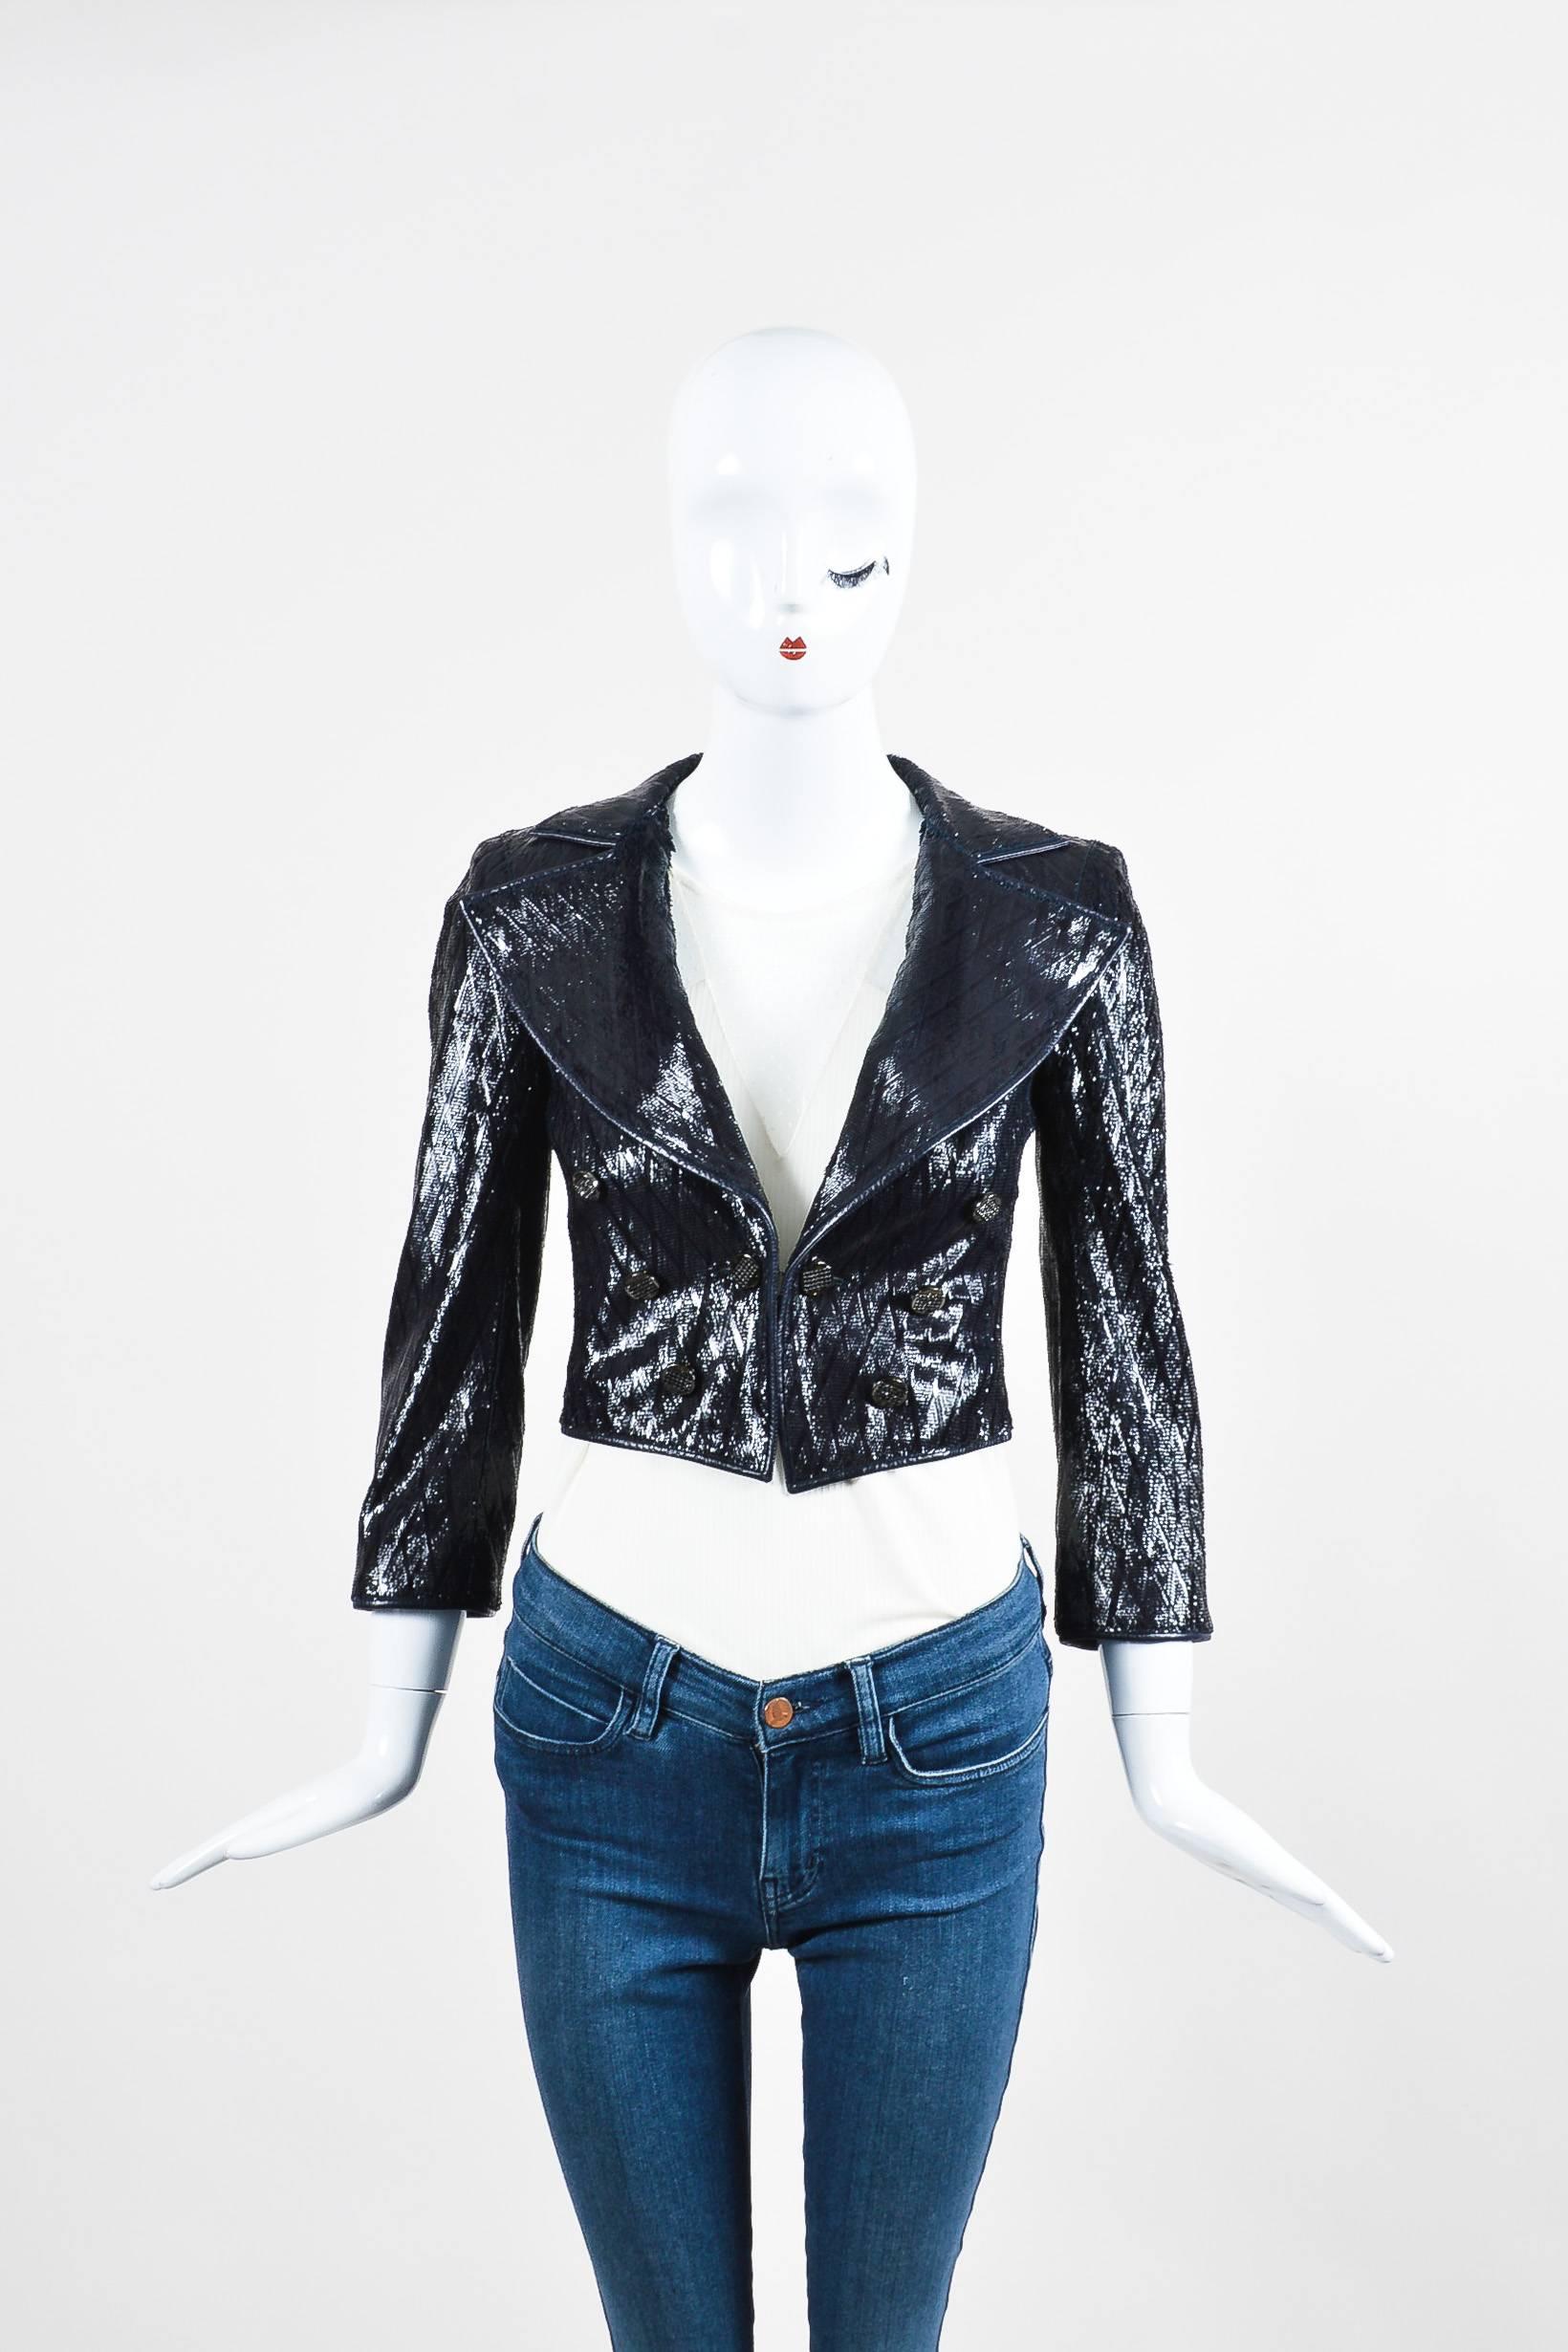 Unique jacket to make a bold statement to an outfit. Intricate feathered laser cut detail on leather with a glossy patent finish. Wide peak lapels. 3/4 sleeves. Hits at waist. Padded shoulders. Front double-breasted embellished button closure.